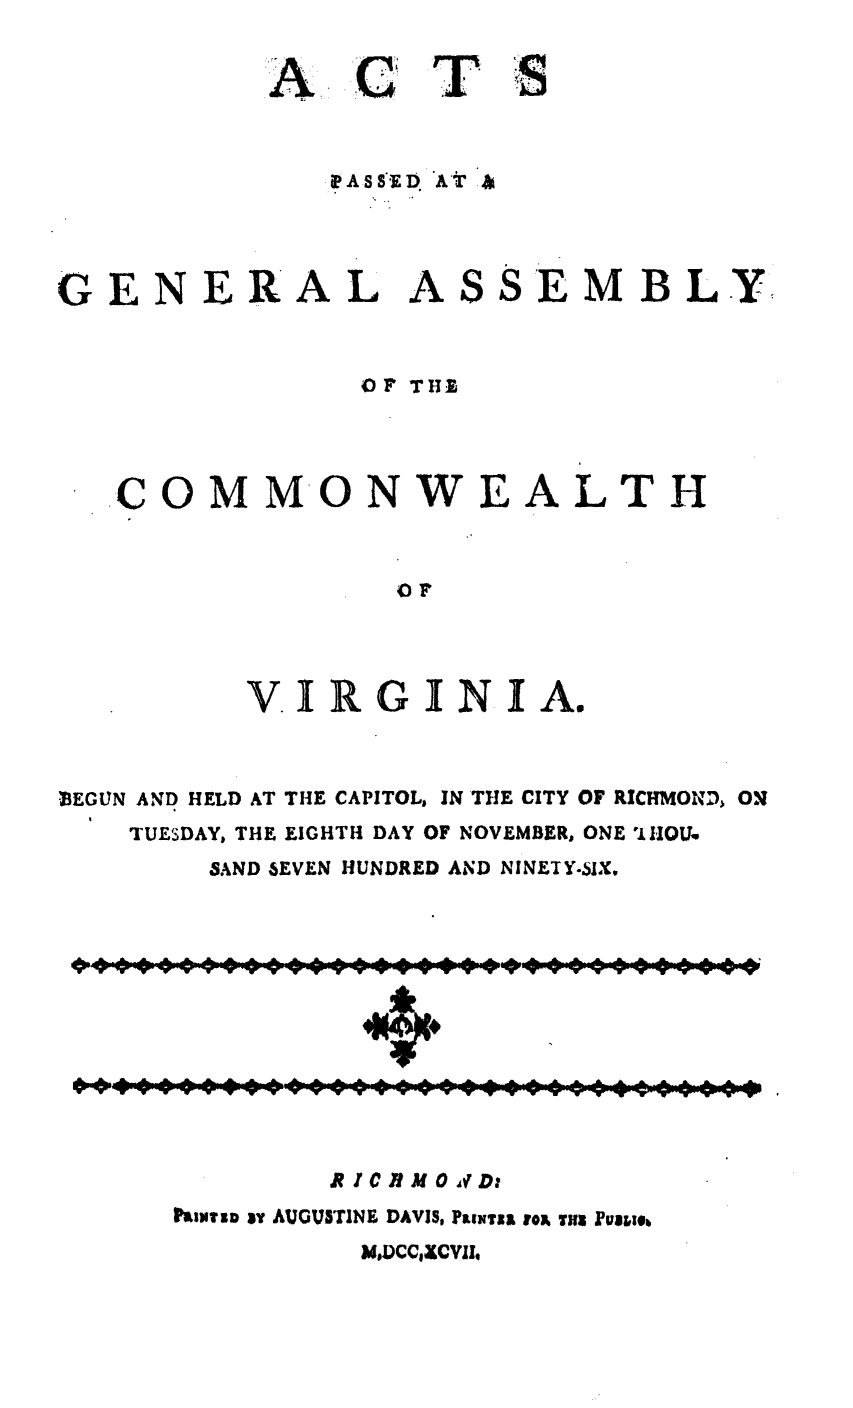 handle is hein.ssl/ssva0184 and id is 1 raw text is: A

GENER

A

L

AS

SEMBLY.

OF THE

COMMON WE

A

LTH

OF
VIRGINIA.

BEGUN AND HELD AT THE CAPITOL, IN THE CITY OF RICHMOND% Ov.
TUESDAY, THE EIGHTH DAY OF NOVEMBER, ONE 'l OU
SAND 6EVEN HUNDRED AND NINETY.IX.

G      HCIMO d        D:
?aimiun s' AUGUVSTINE DAVIS, PoiNirsa toy TJIs Nsal.

MOCC1ZCVII,

PC T
eA s s  DA.T i

S


